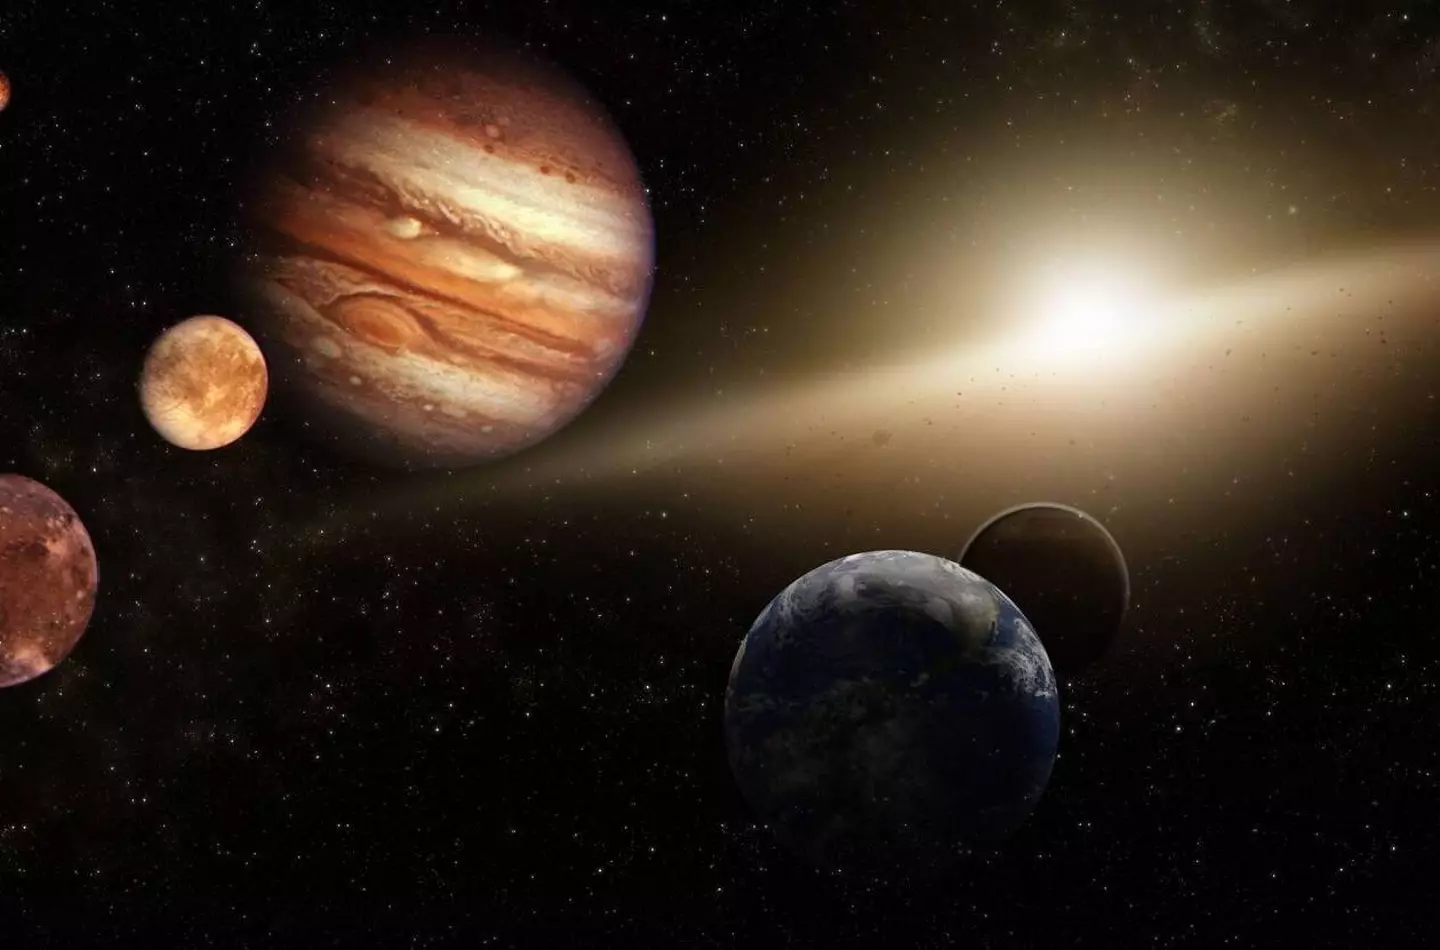 Trace amounts could help detect life in the solar system.